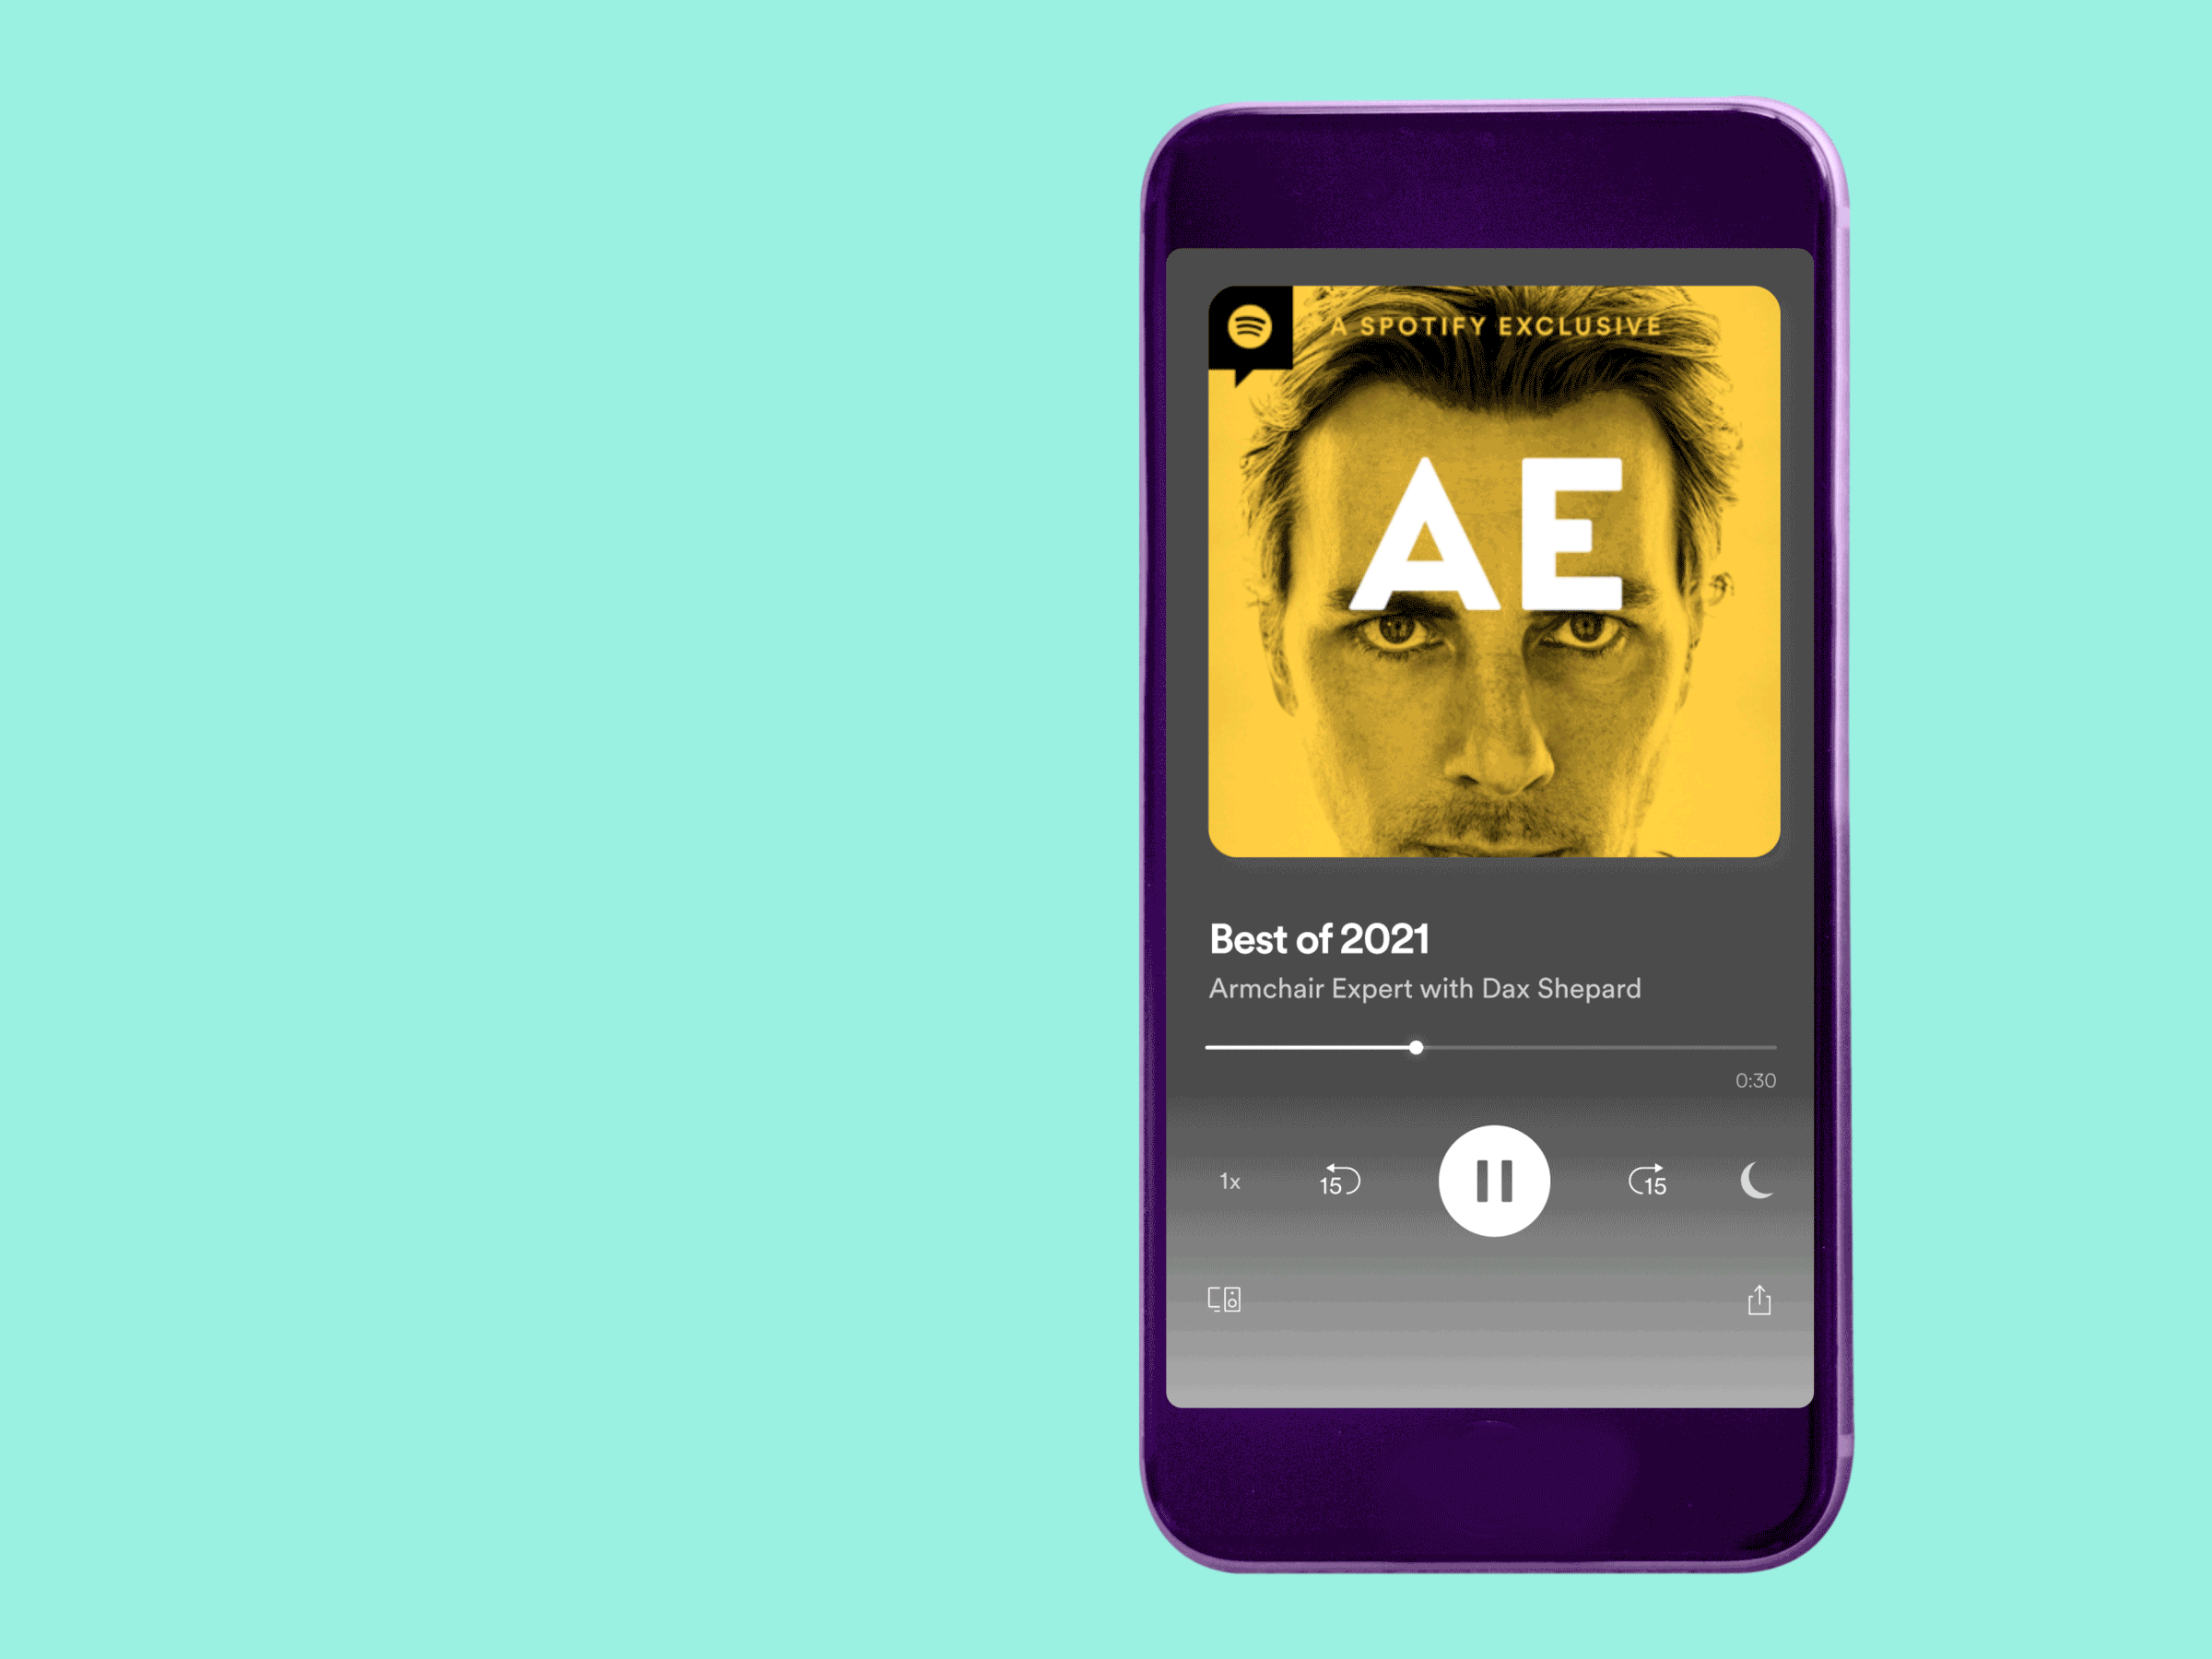 30 Best Spotify Podcasts Worth Listening To 